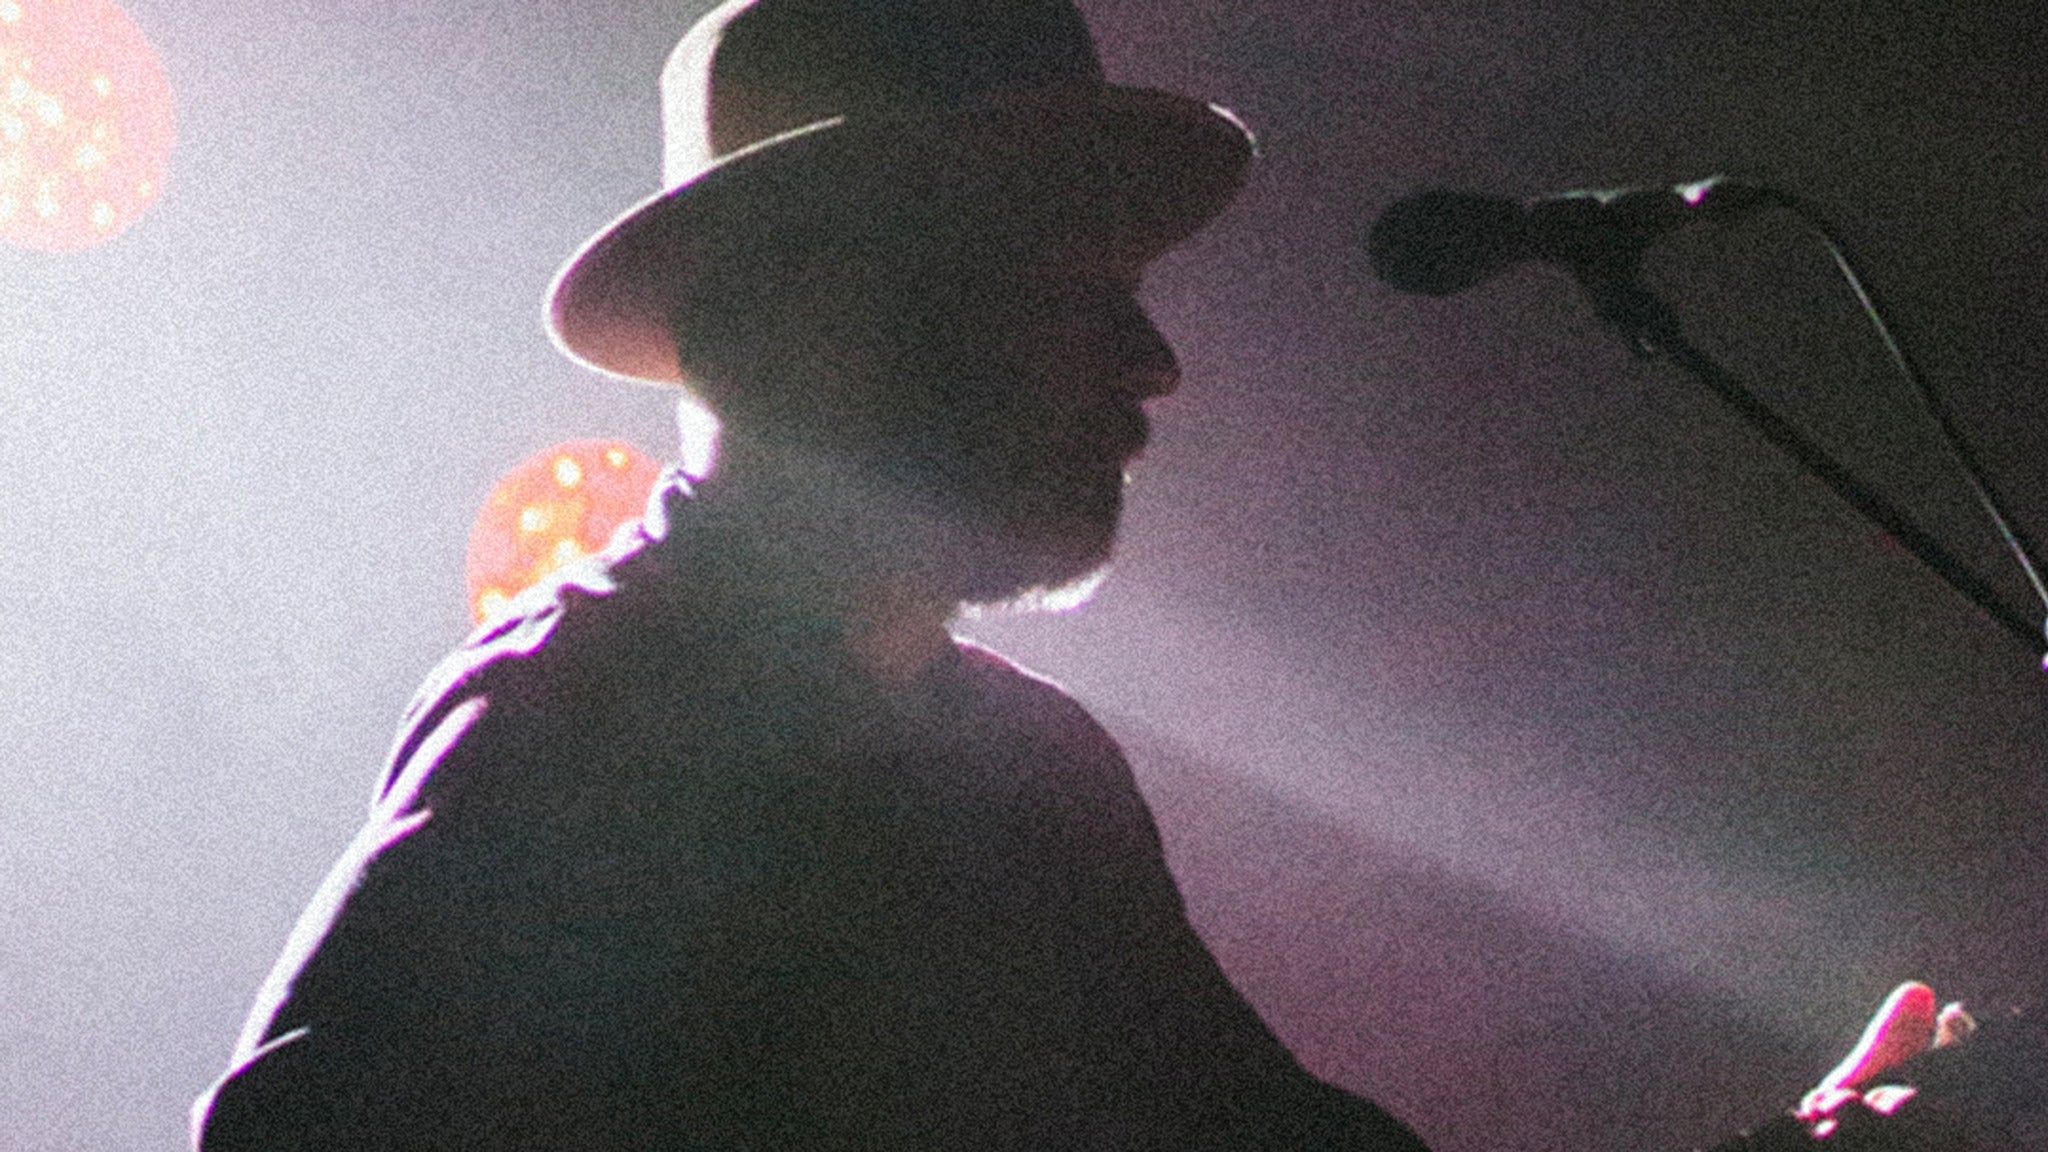 City and Colour Spring 2023 pre-sale password for your tickets in New York